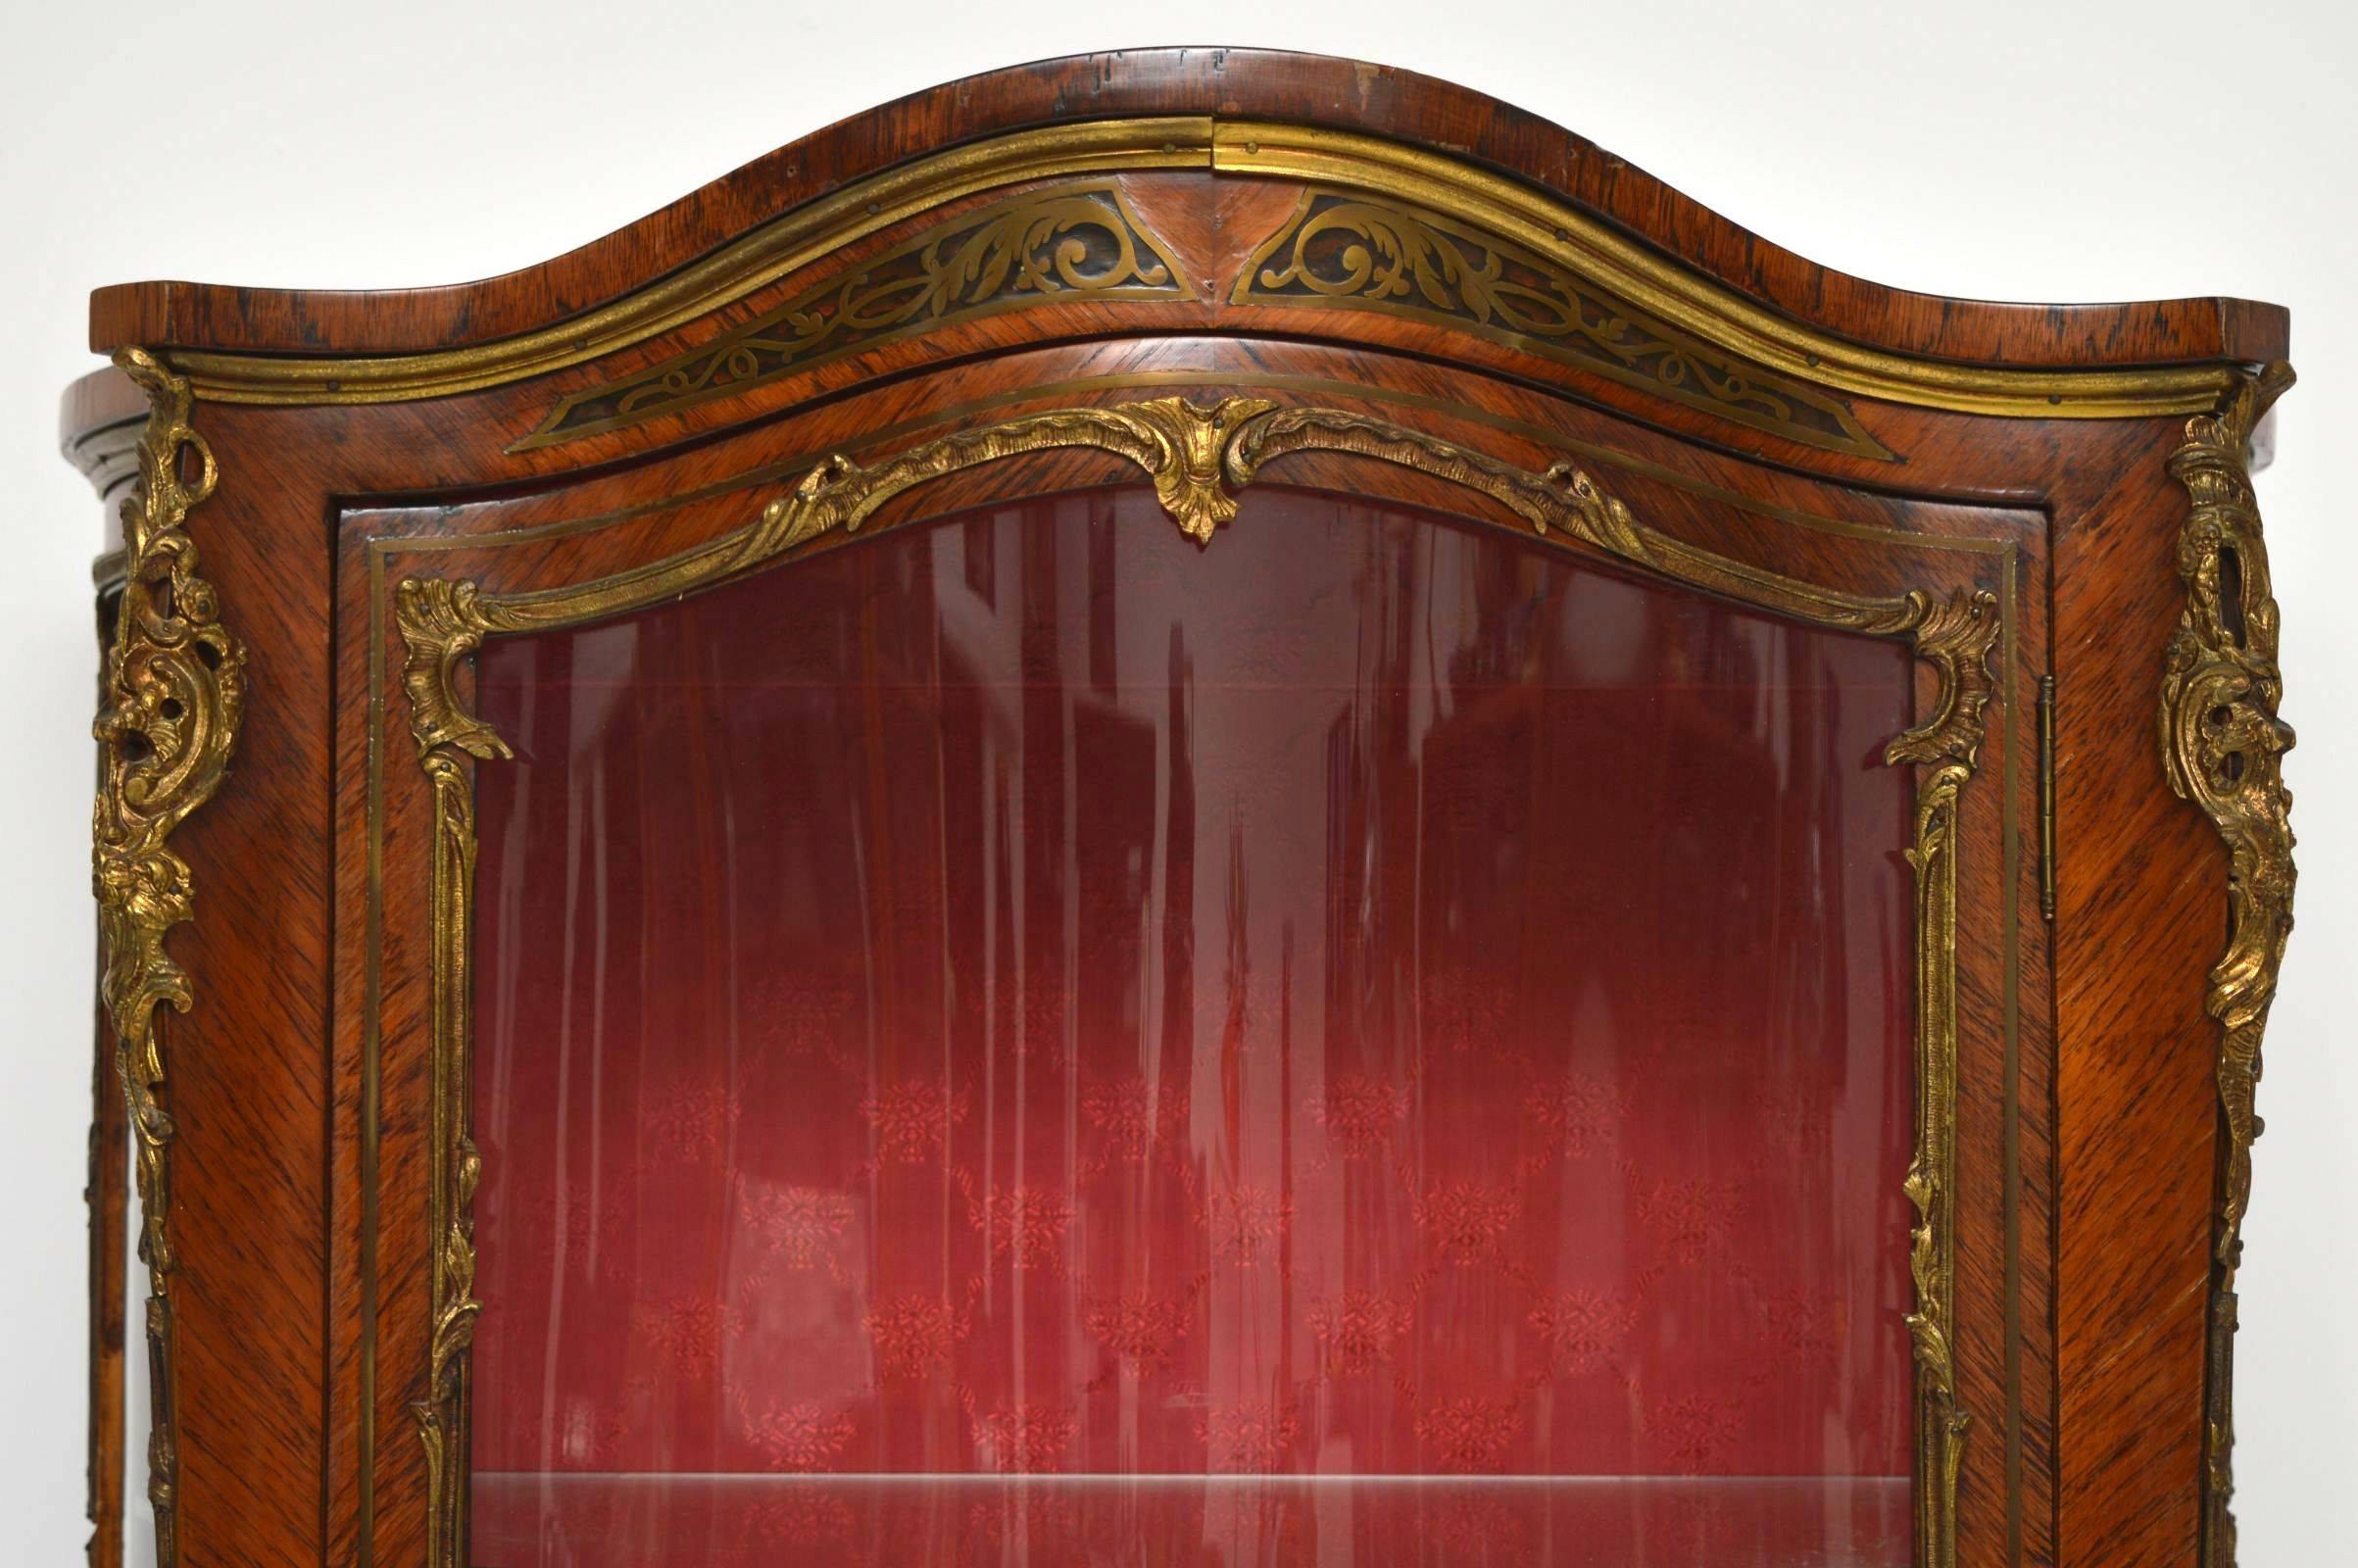 Early 20th Century Antique French Ormolu-Mounted Display Cabinet